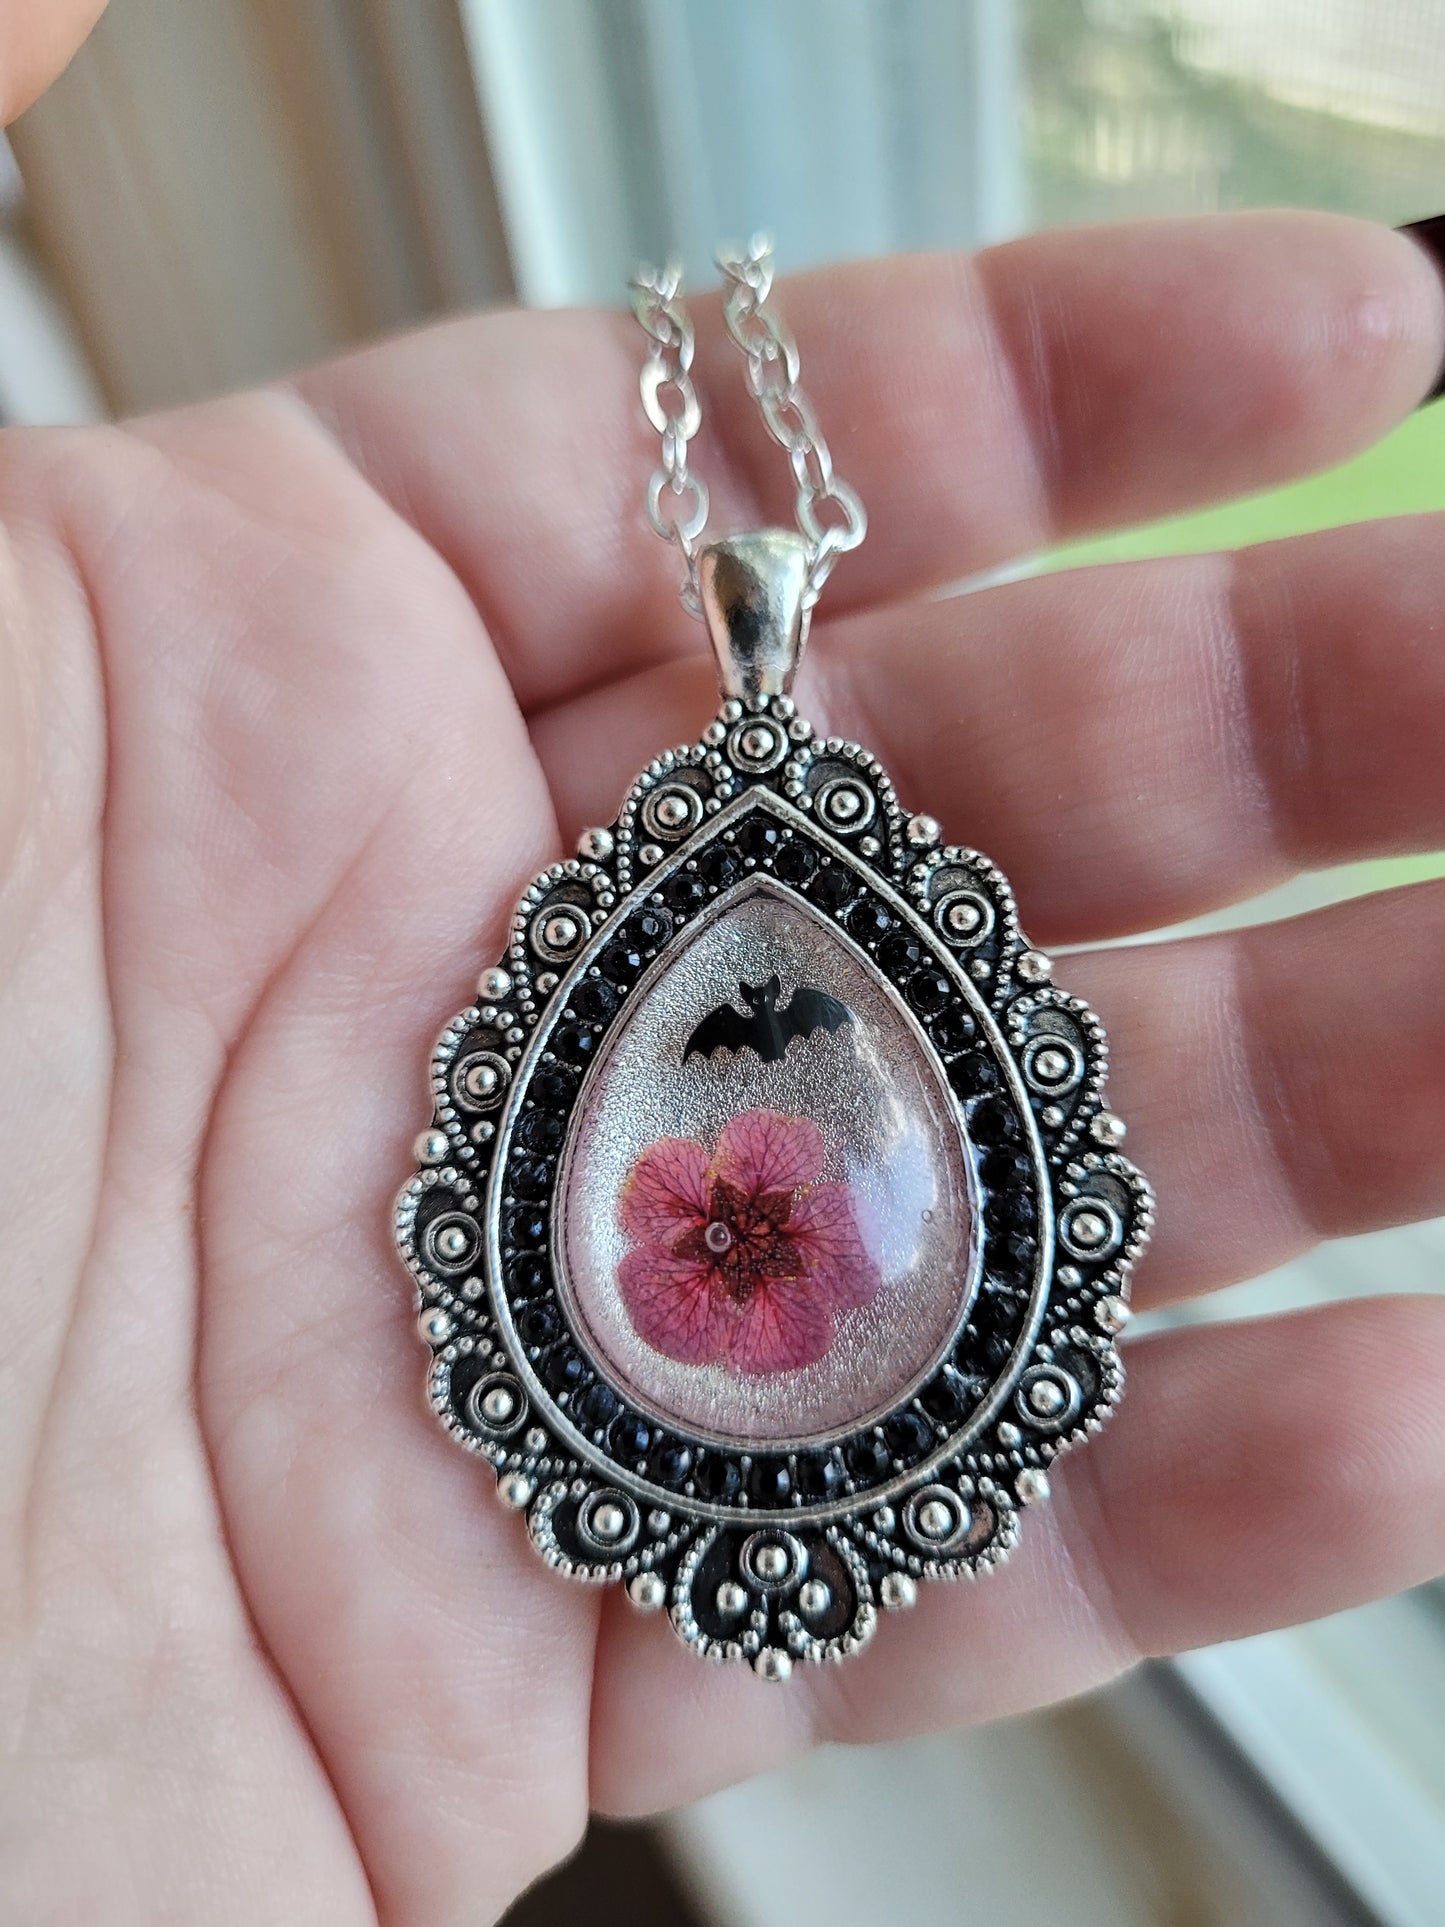 Goth Dried Flower and Black Bat Sequin Ornate Teardrop Pendant Necklace with Black Rhinestones